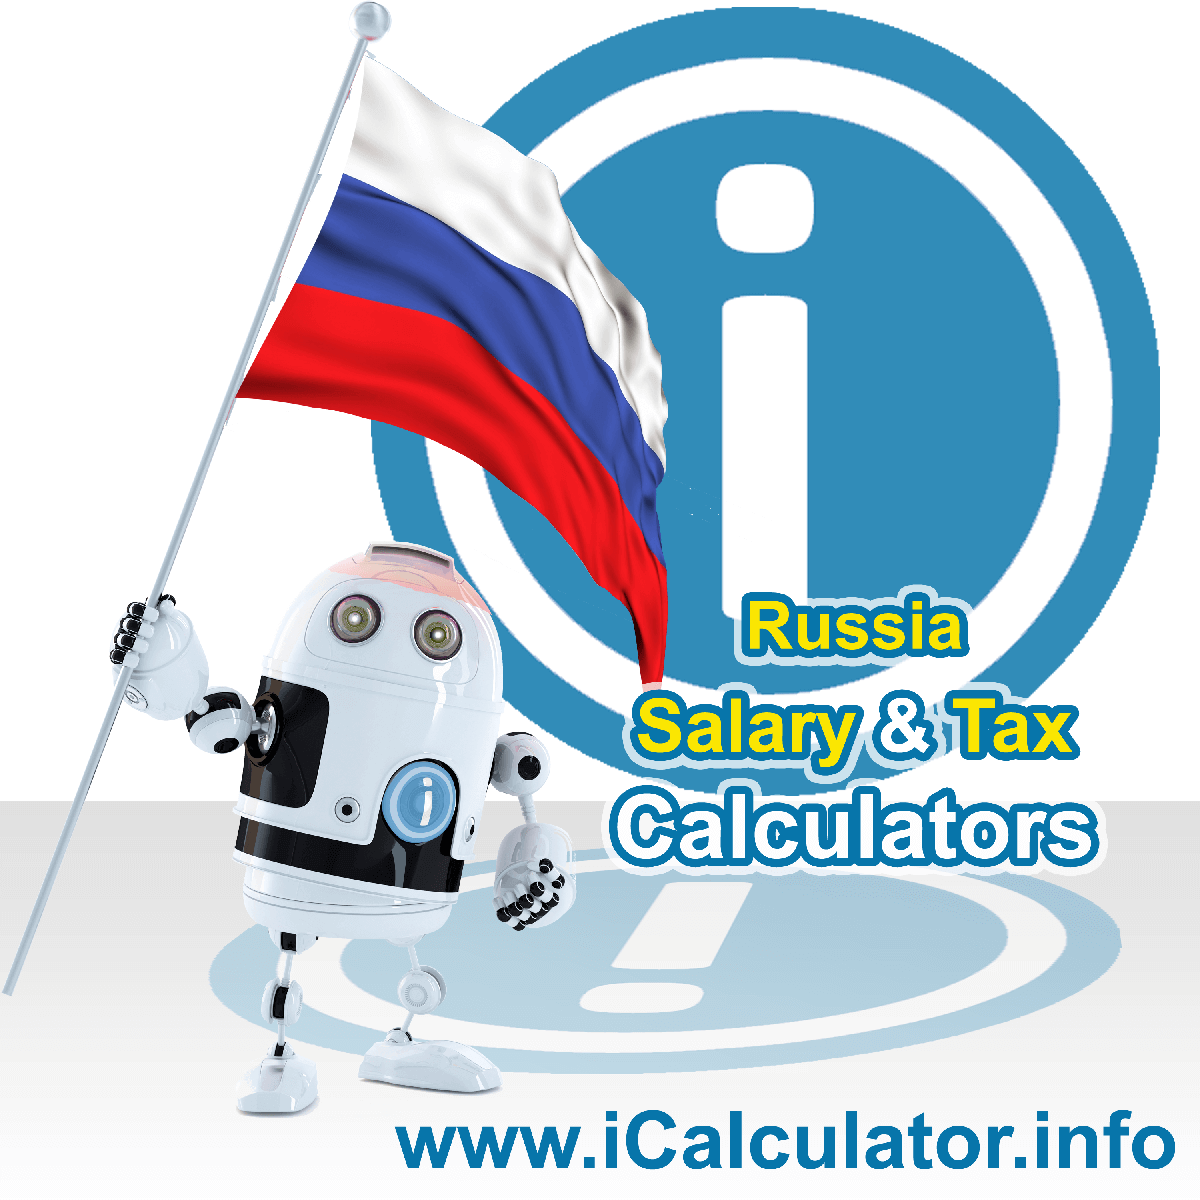 Russia Wage Calculator. This image shows the Russia flag and information relating to the tax formula for the Russia Tax Calculator